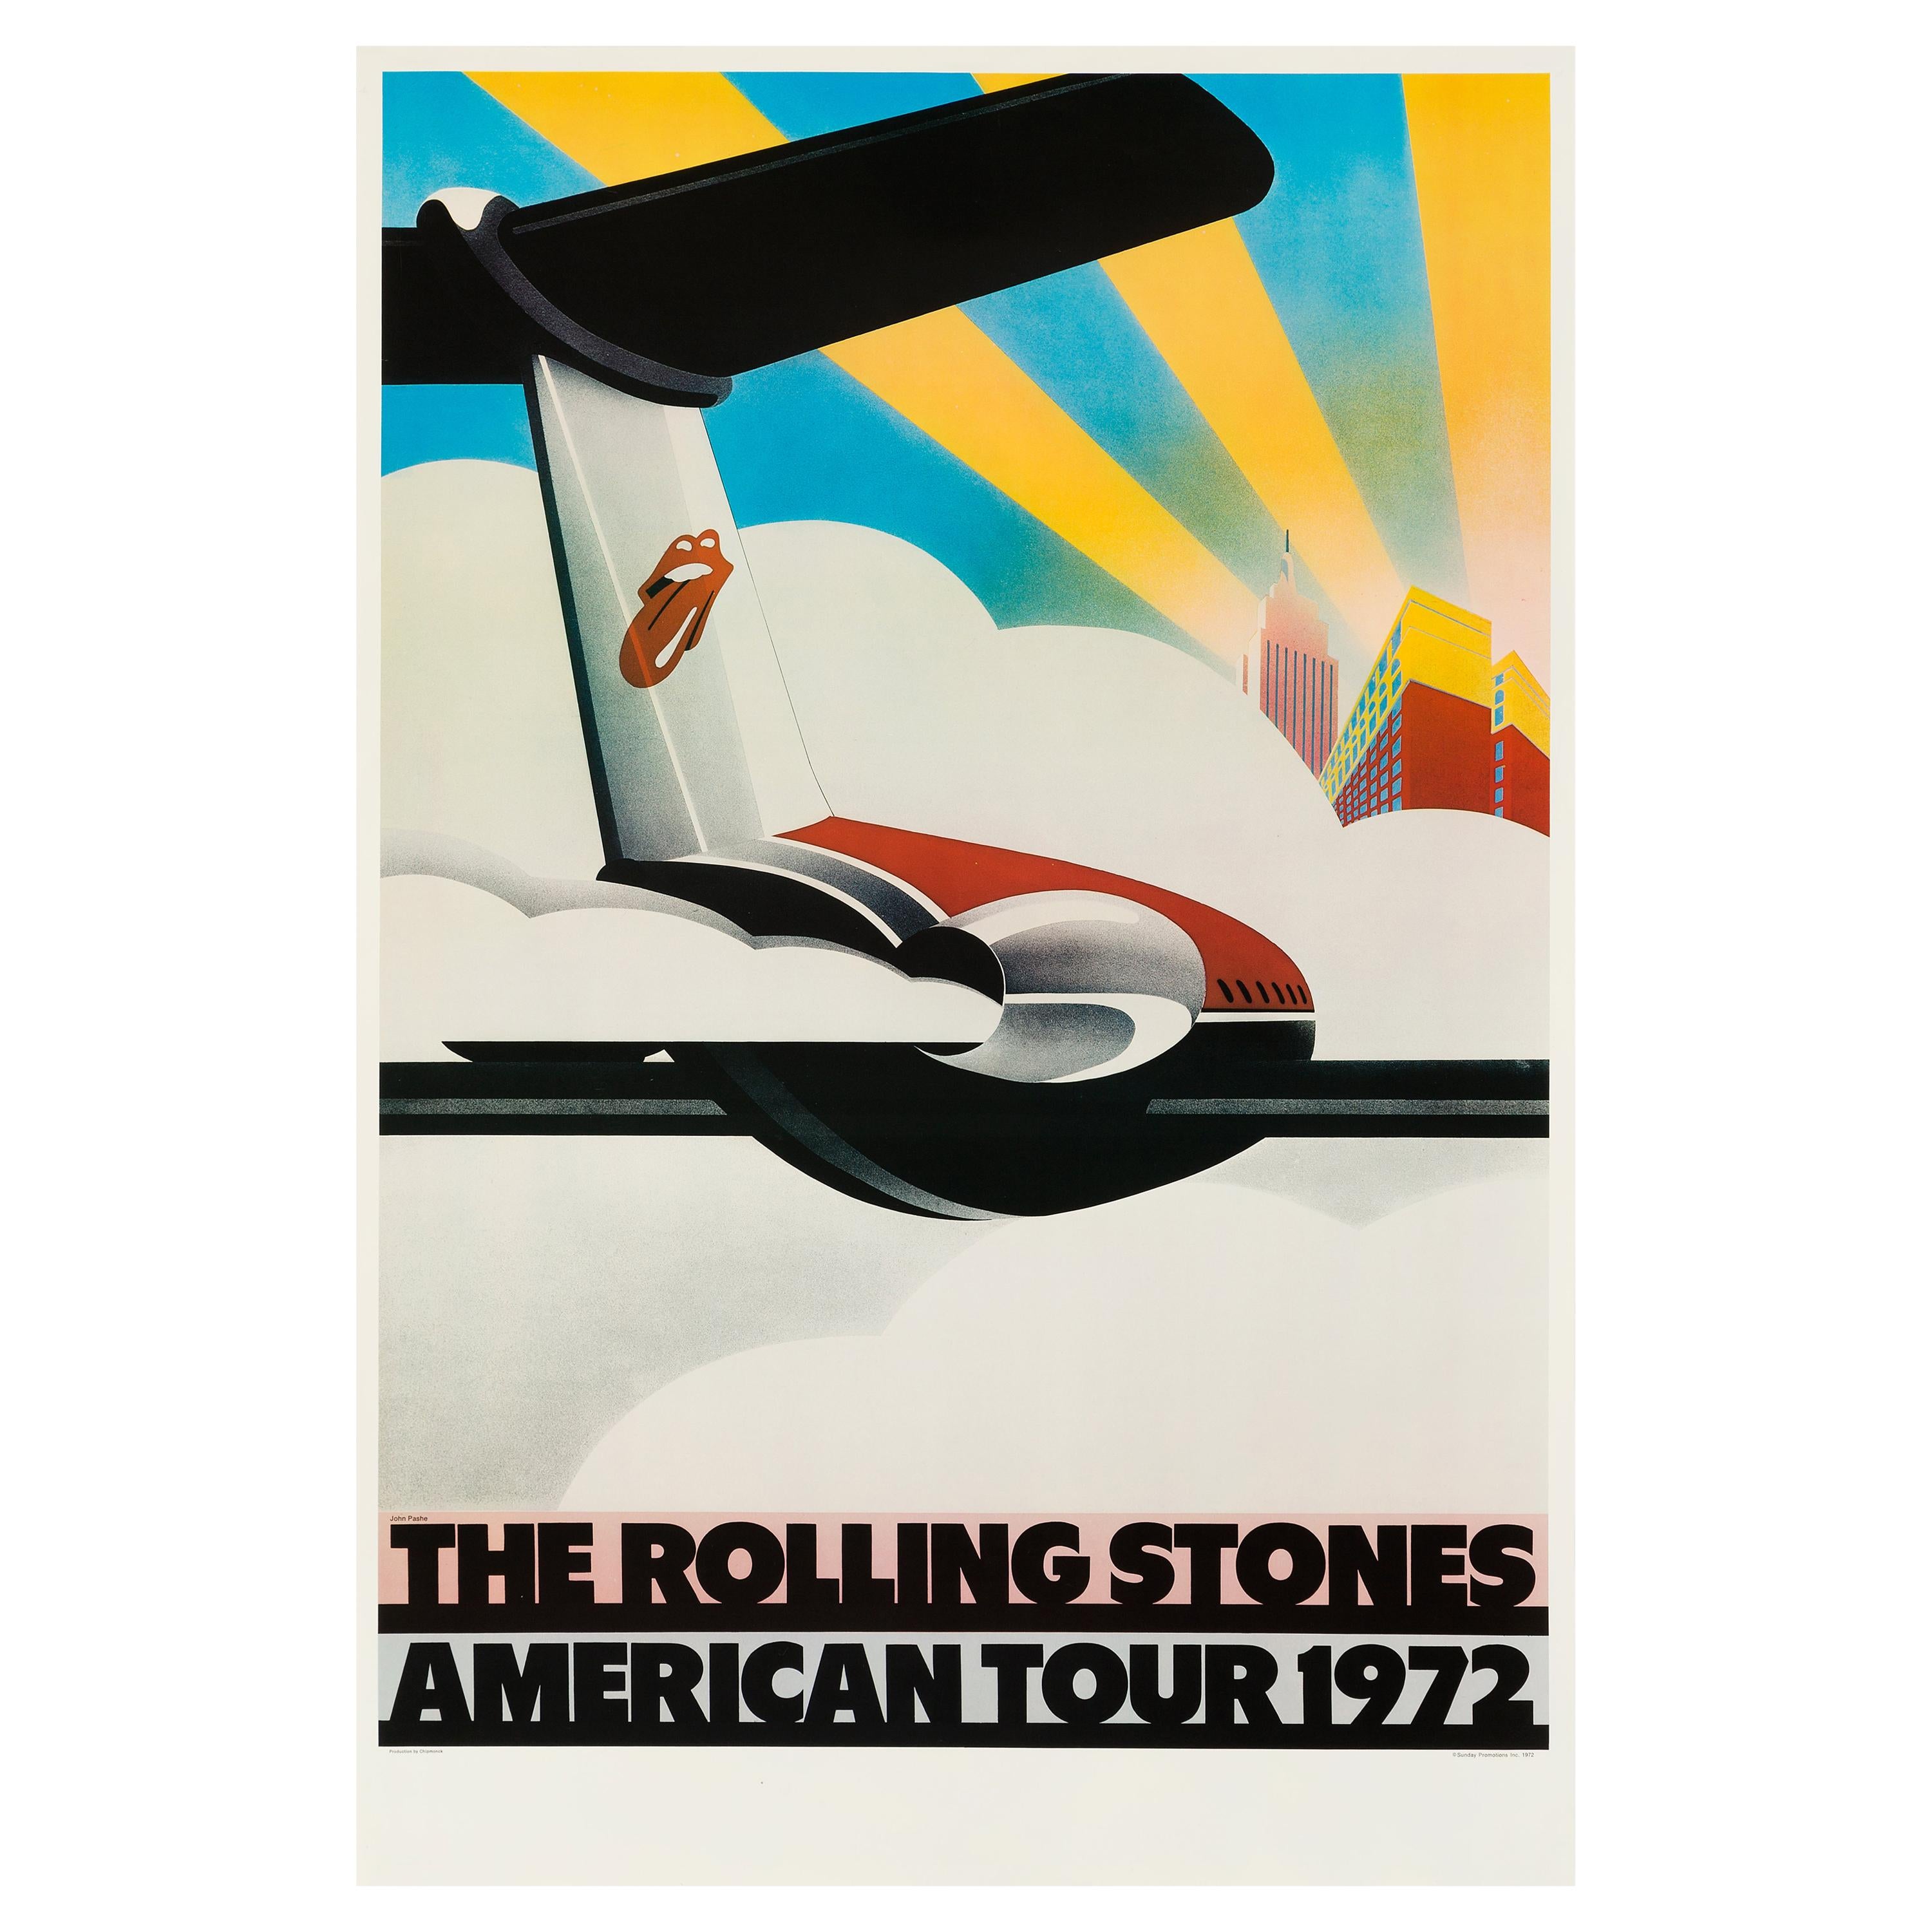 The Rolling Stones Original Vintage American Tour Poster by John Pasche, 1972